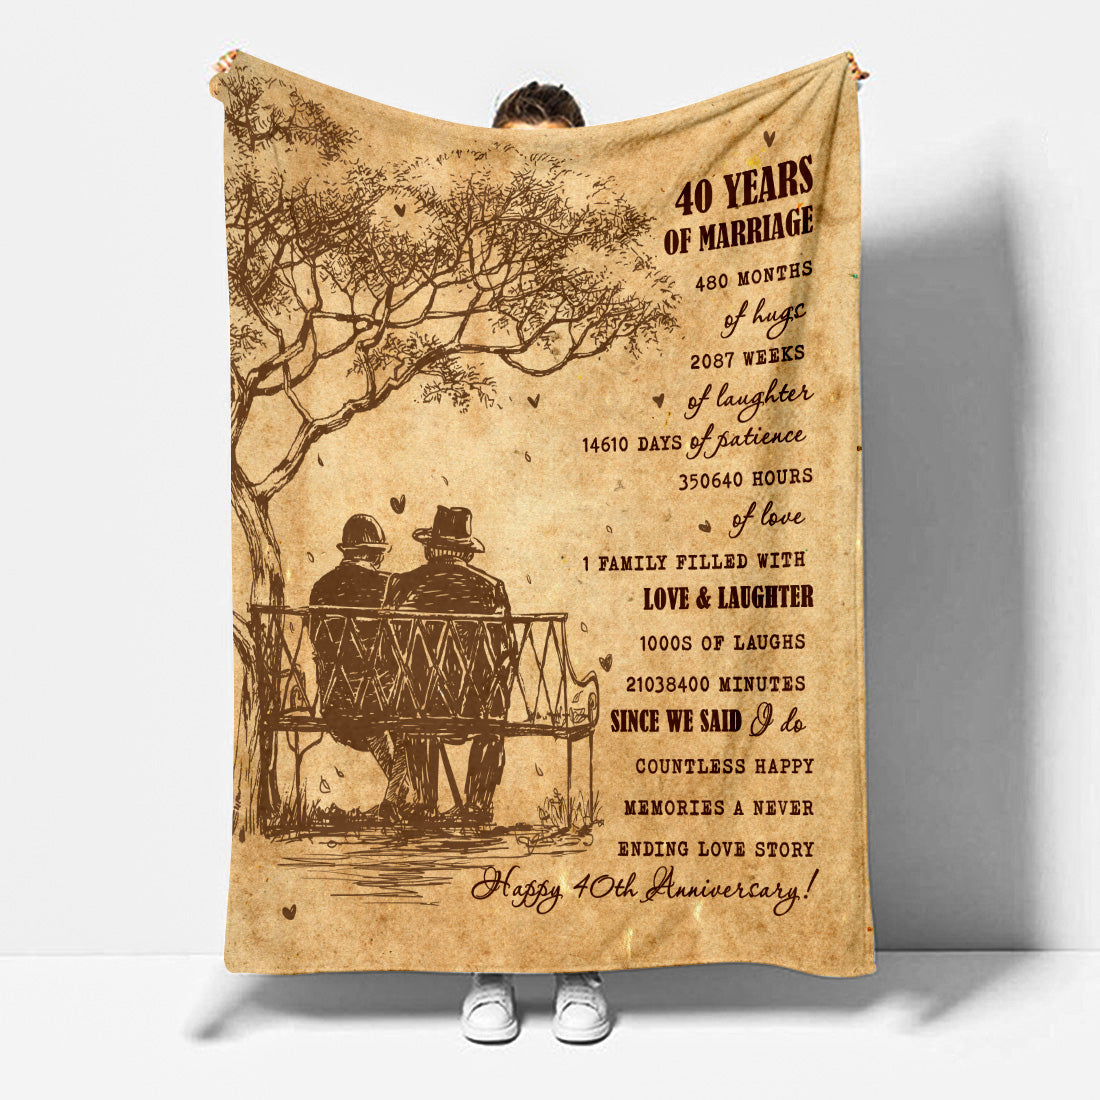 40th Anniversary Wedding Gift For Couple- 40 Years of Marriage Gift for Husband Wife Mom Dad Parents- Velveteen Plush Blanket- Ruby Marriage Anniversary Blanket For Her Him, Valentines Day Gift